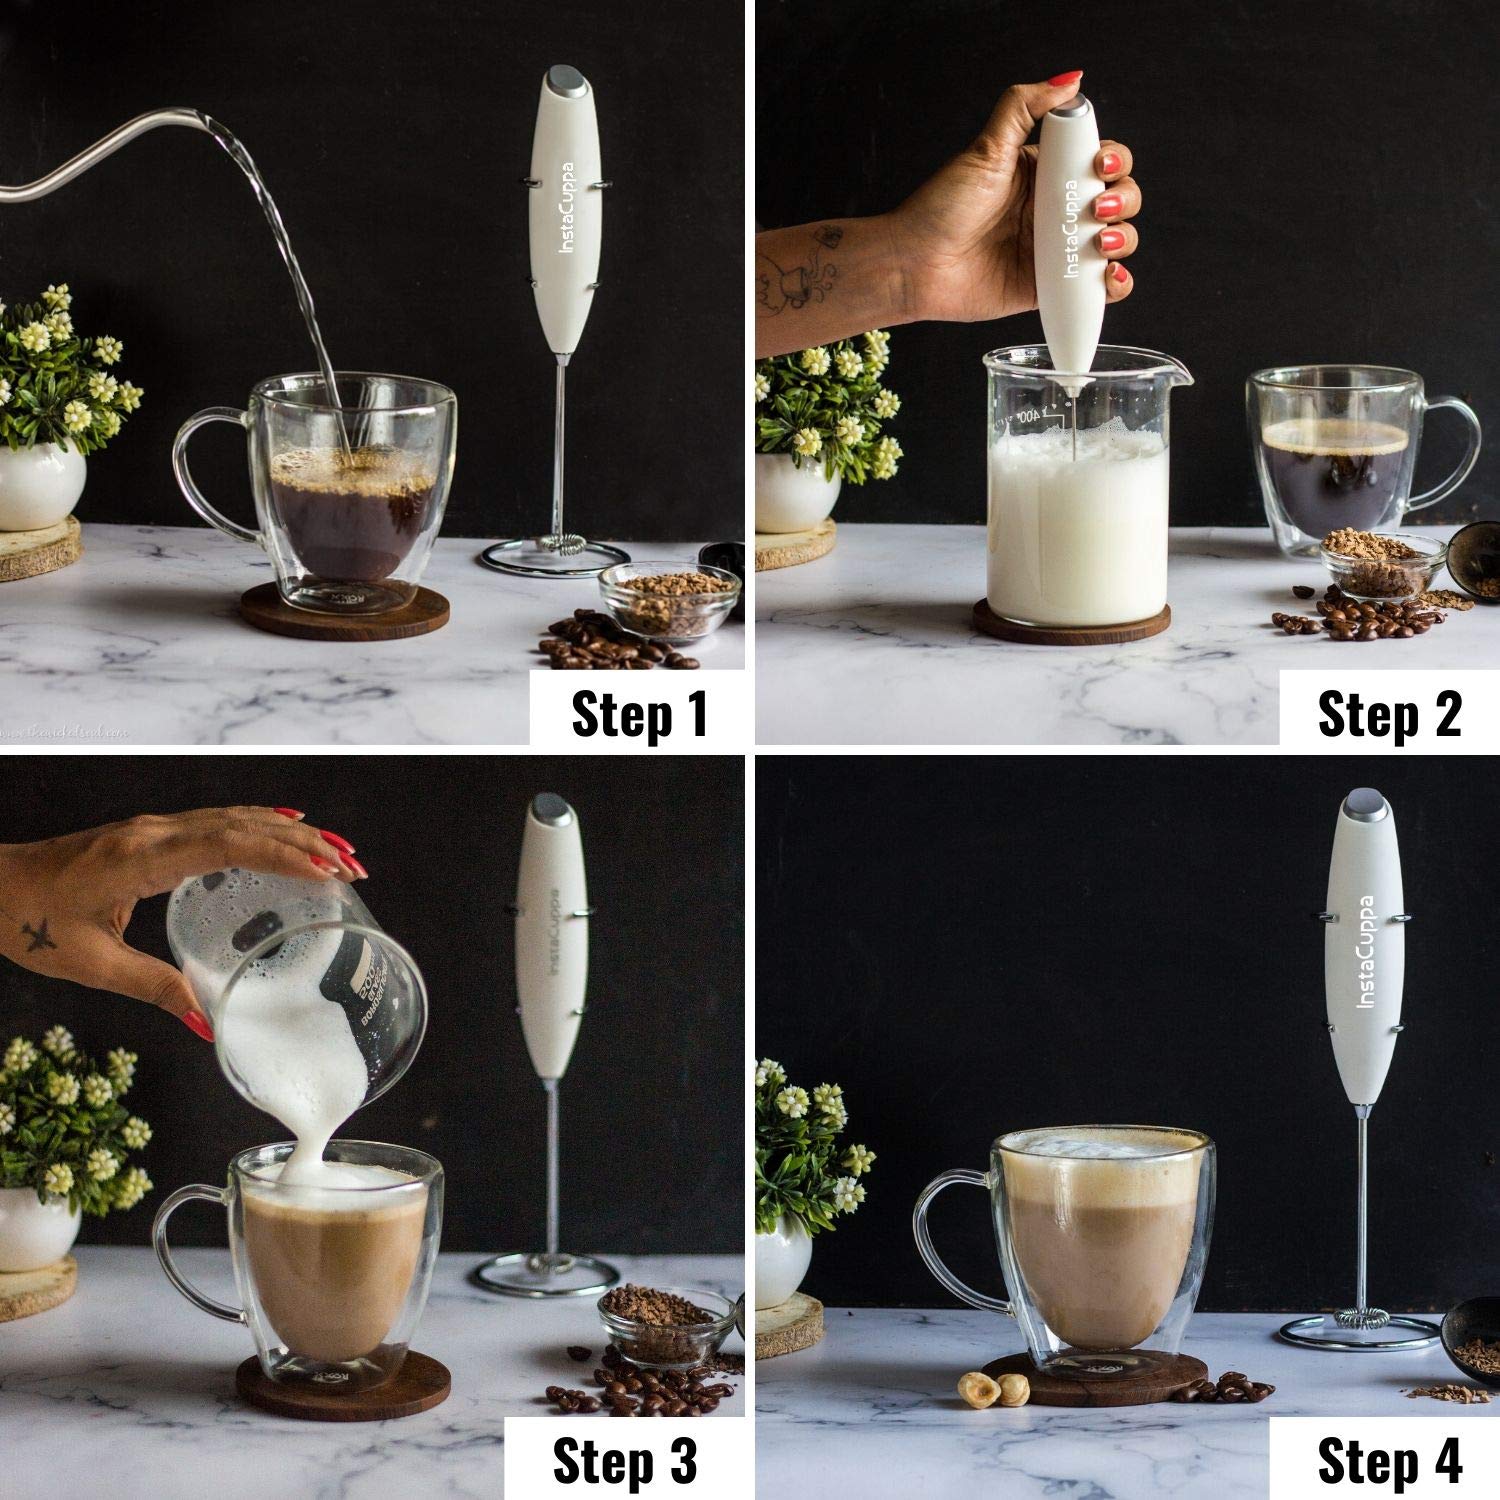 InstaCuppa Manual Milk Frother with Premium Grade Borosilicate